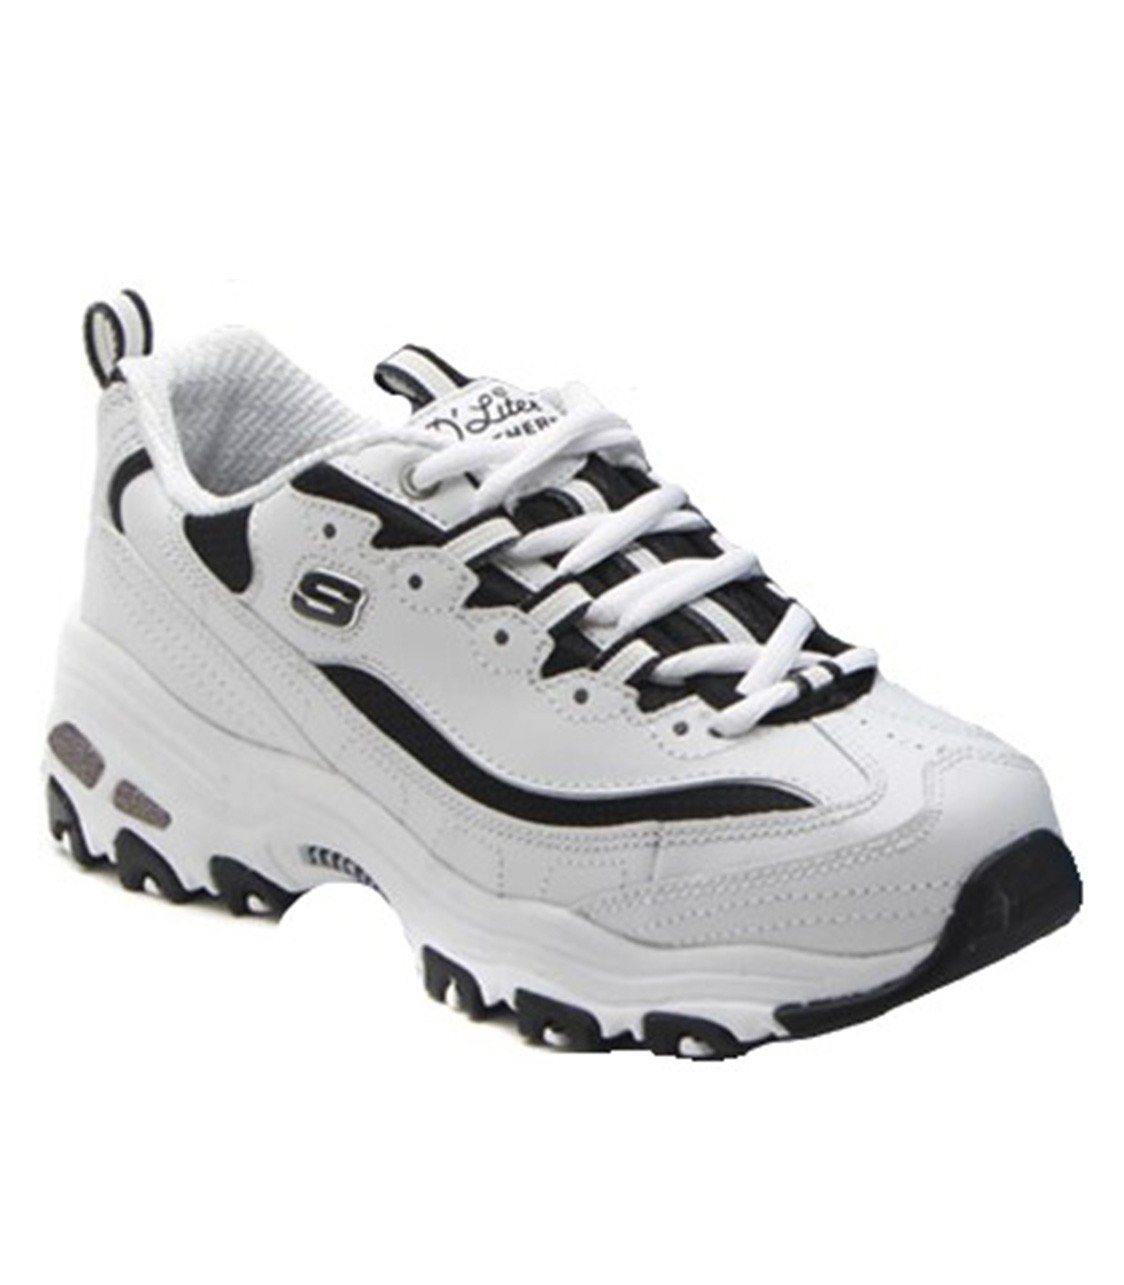 best place to buy skechers shoes